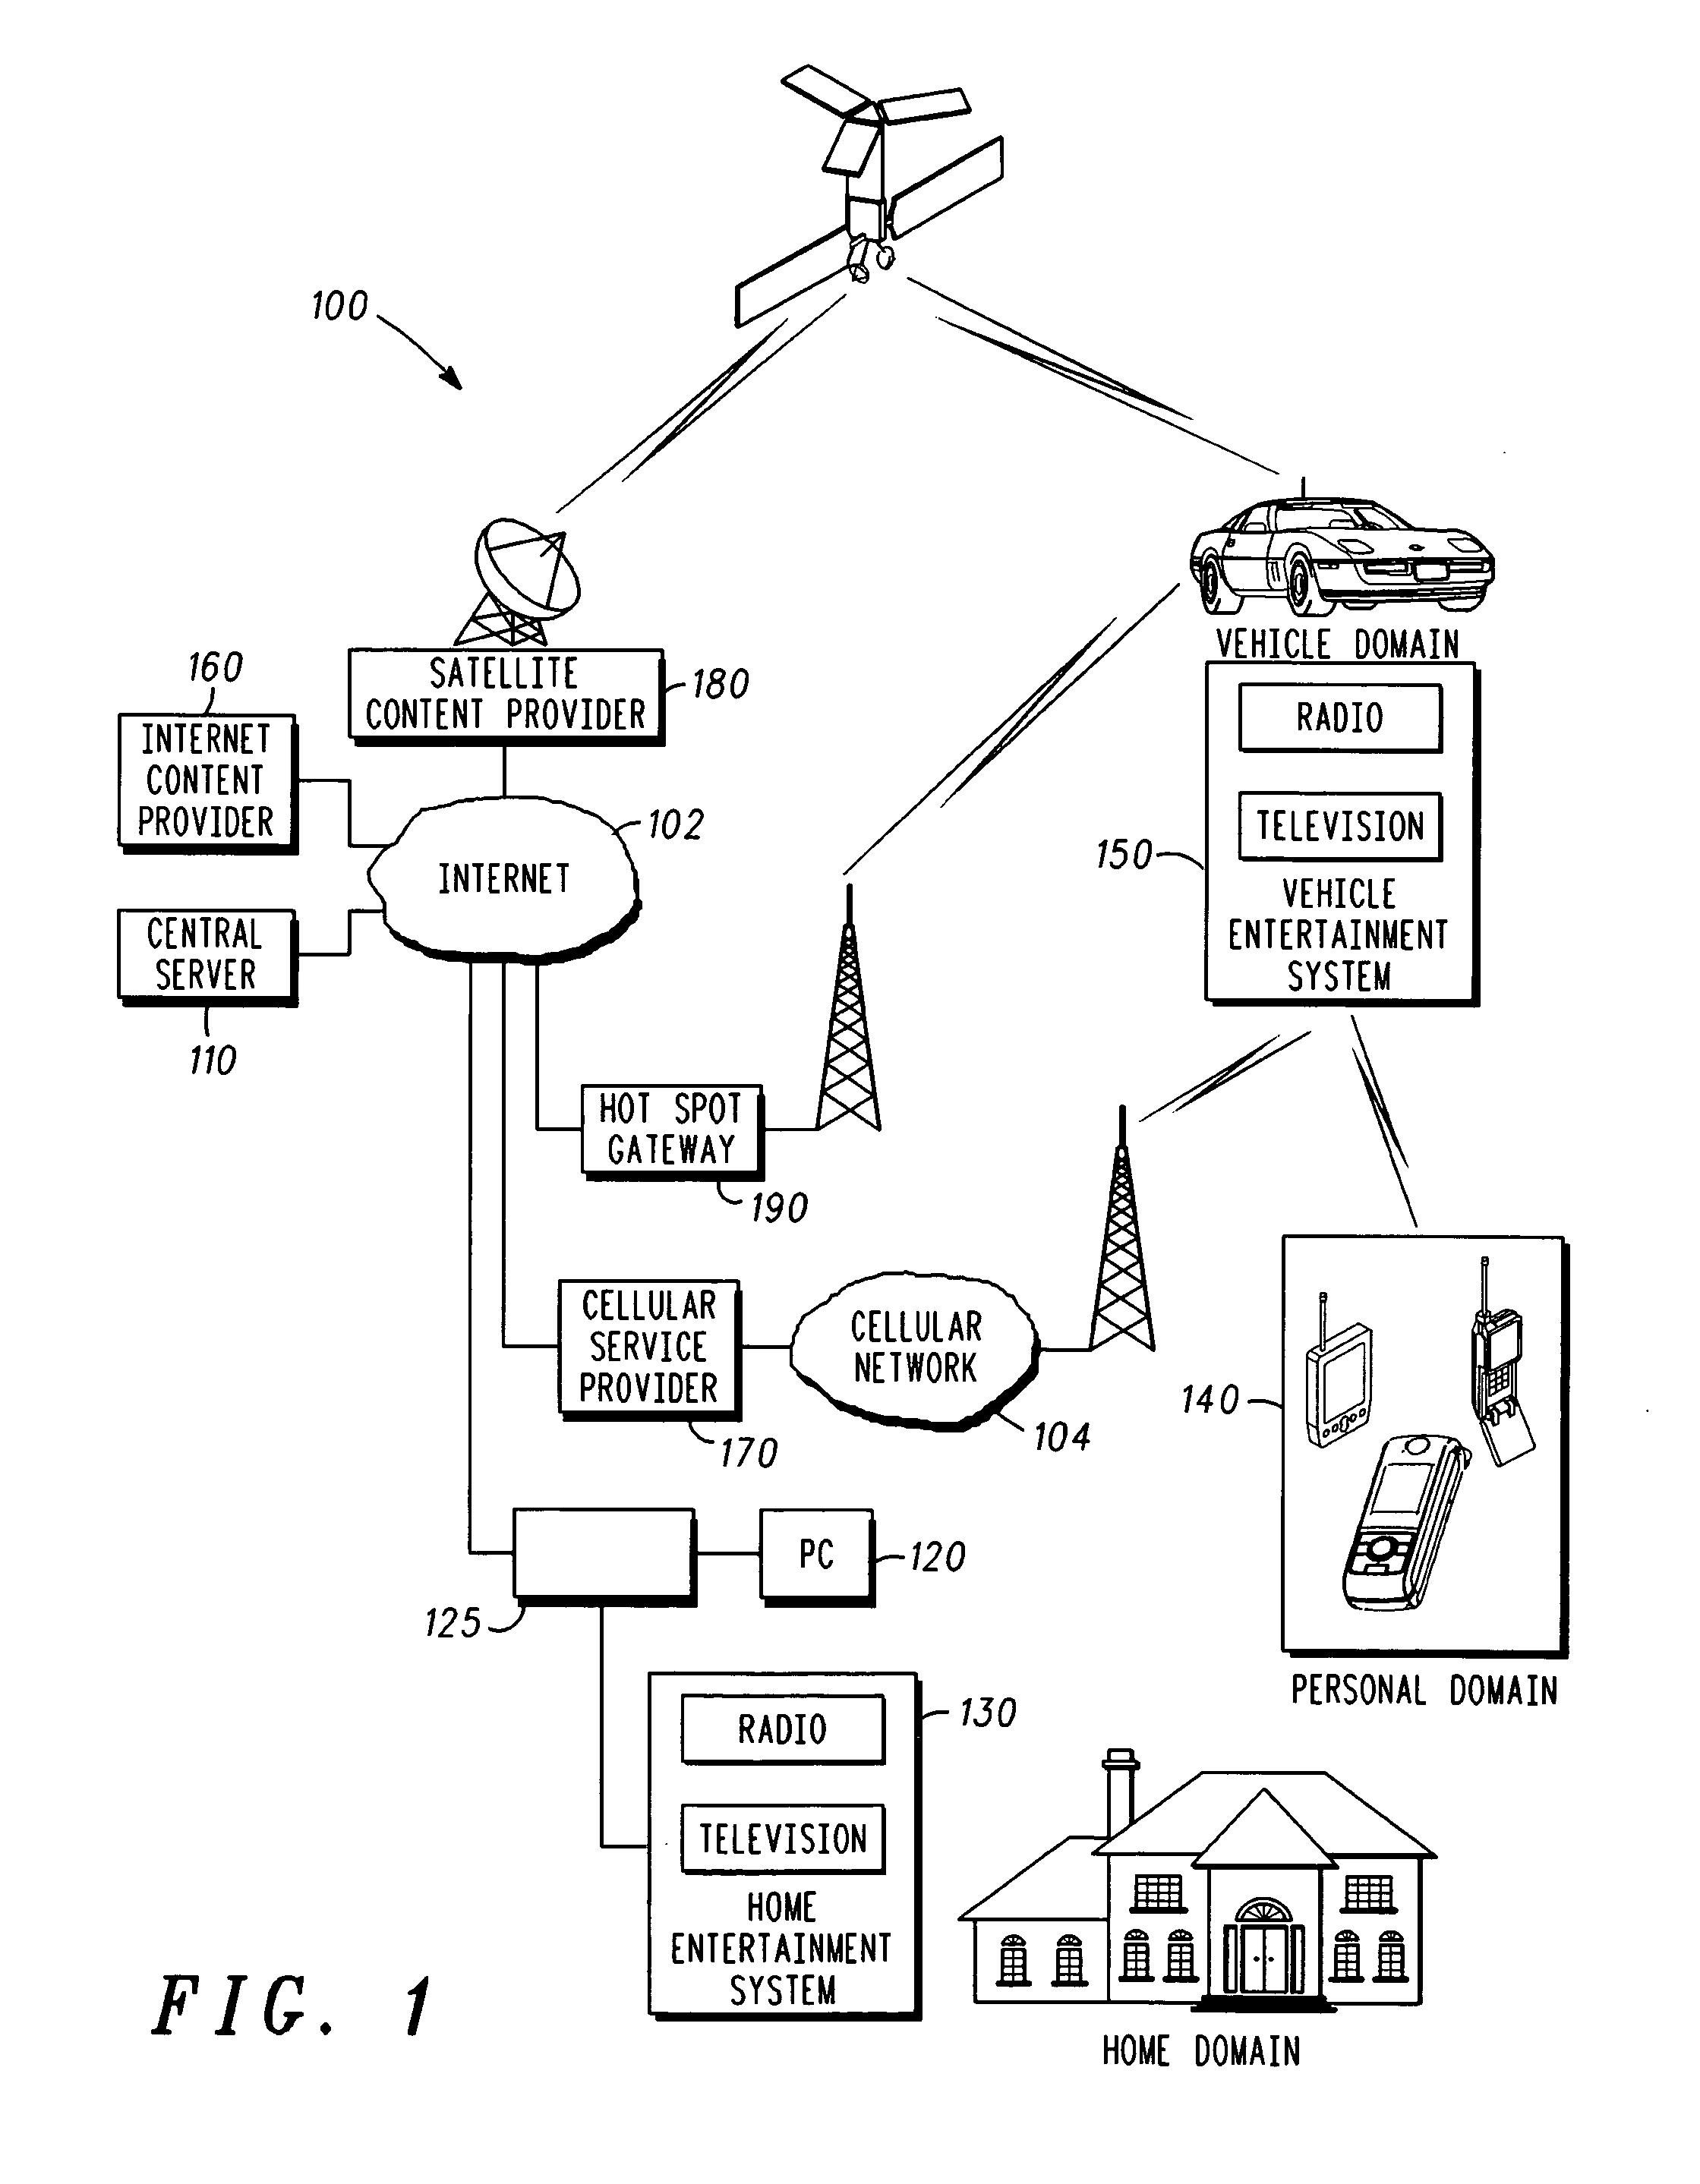 System and method for real-time processing and distribution of media content in a network of media devices